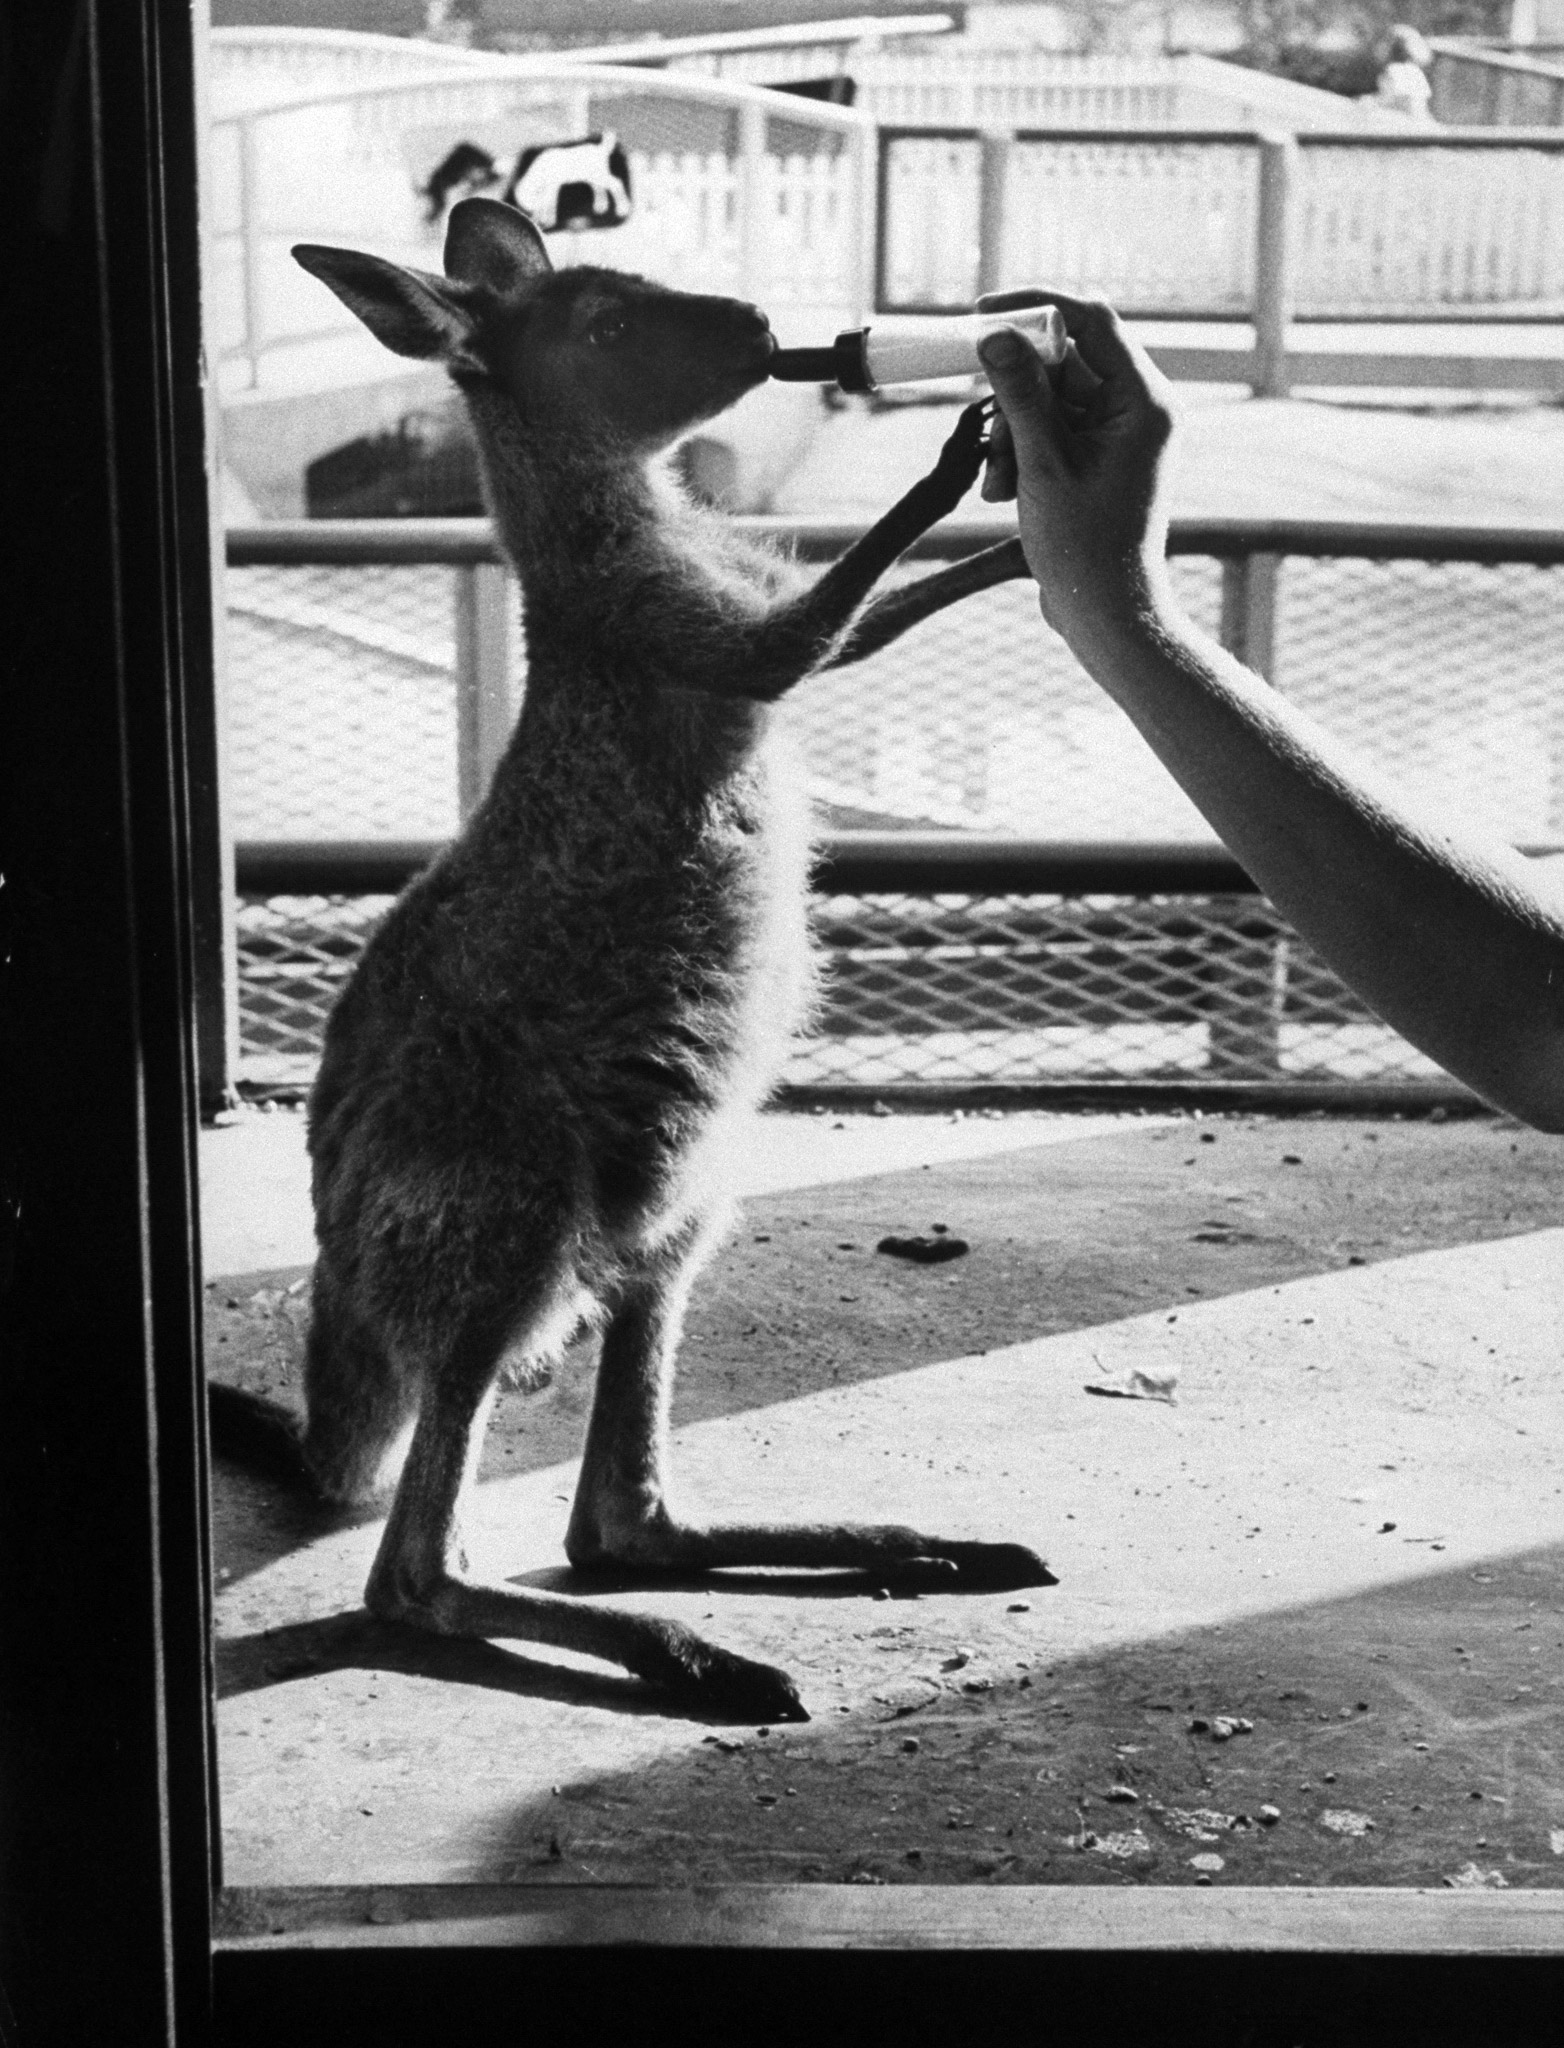 Baby kangaroo being bottle fed at Brookfield Children's Zoo. Chicago, 1953.